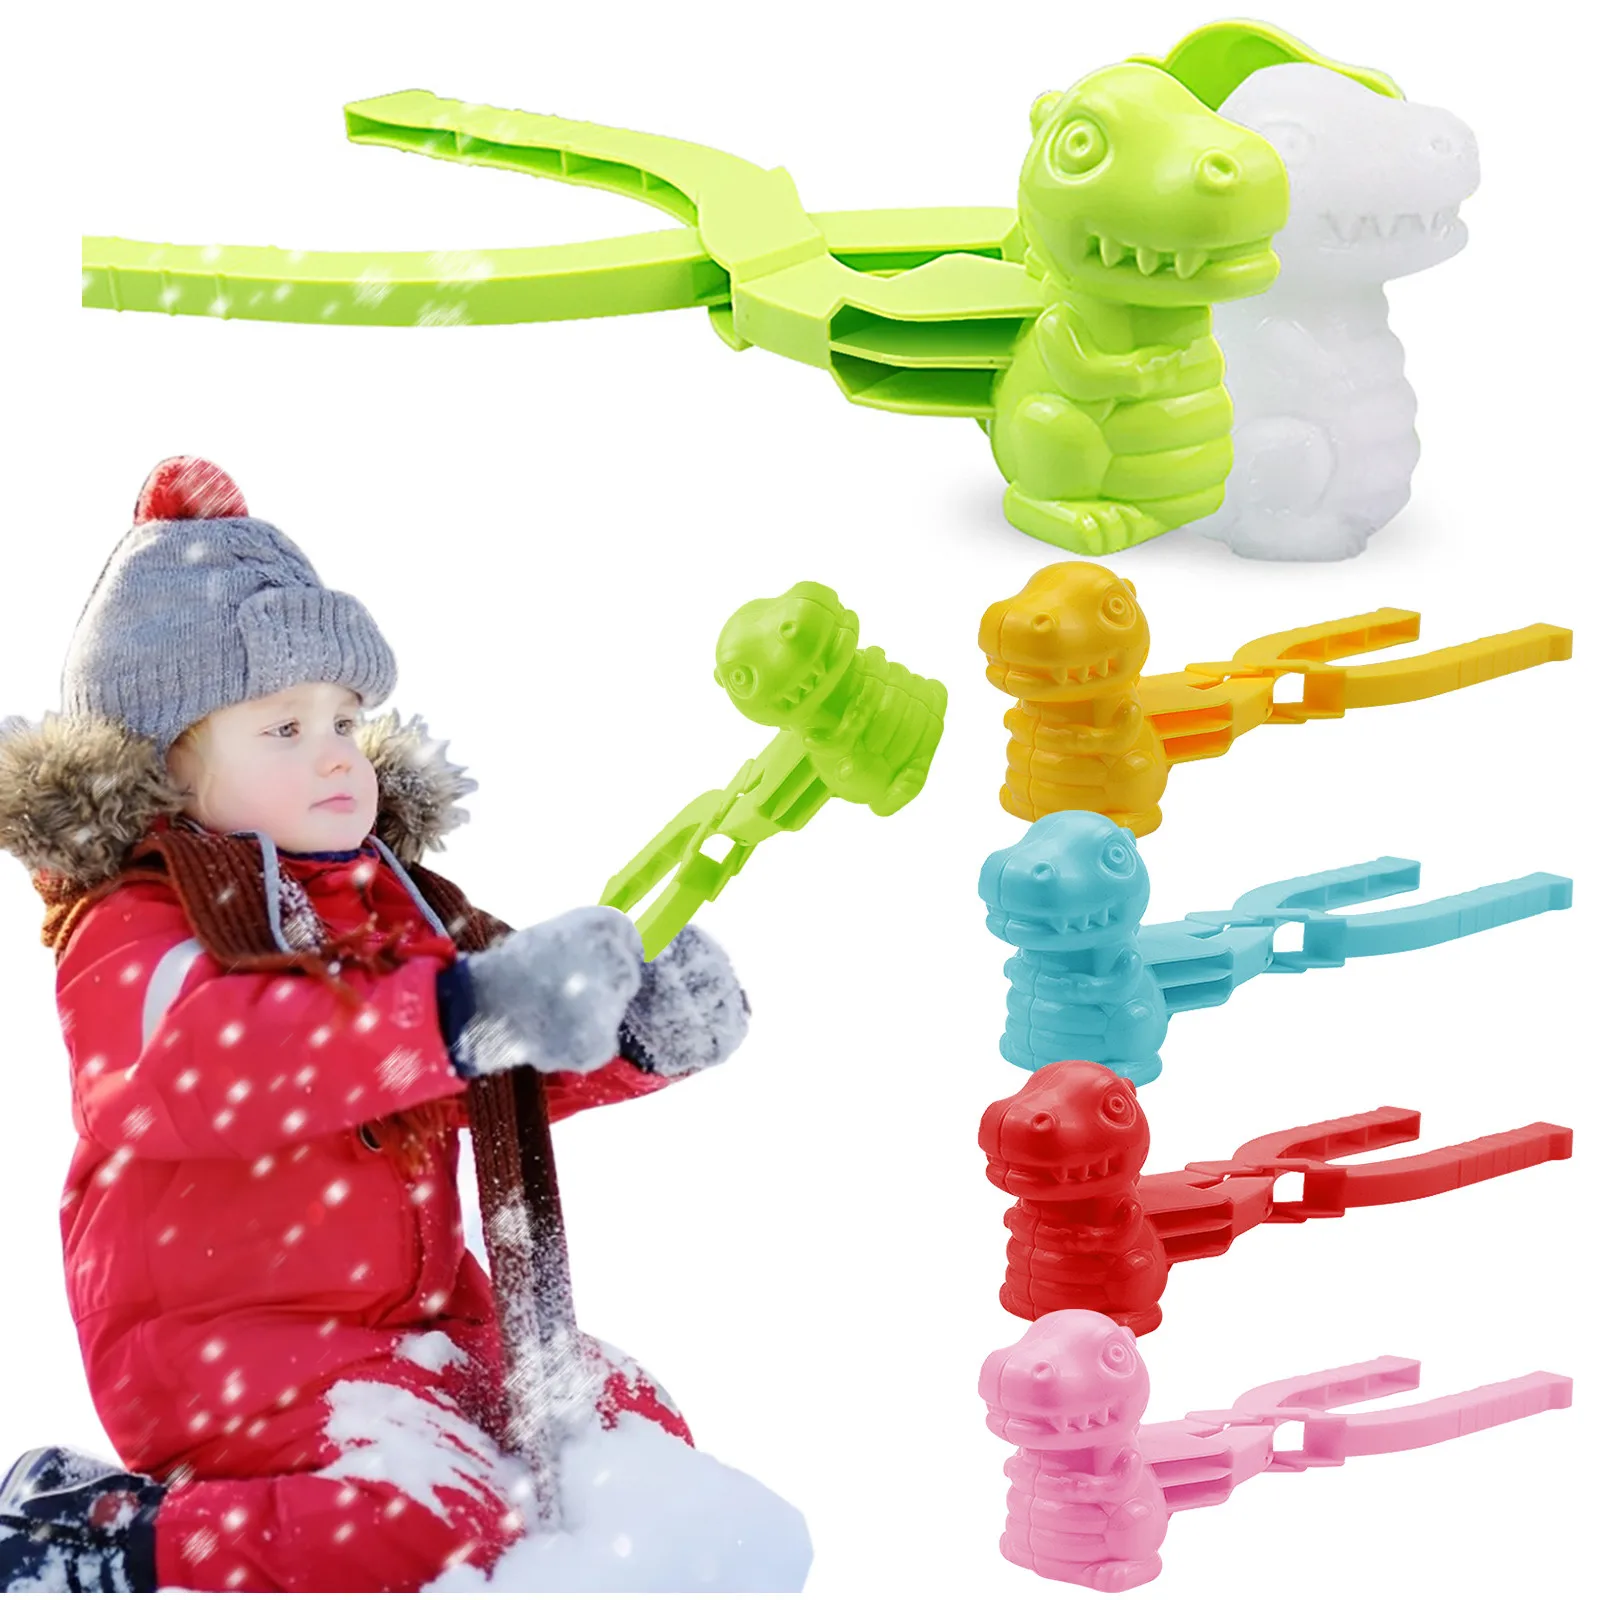 

Dinosaur Shaped Snowball Maker Clip Children Outdoor Plastic Winter Snow Sand Mold Tool For Snowball Fight Fun Sports Kids Toys